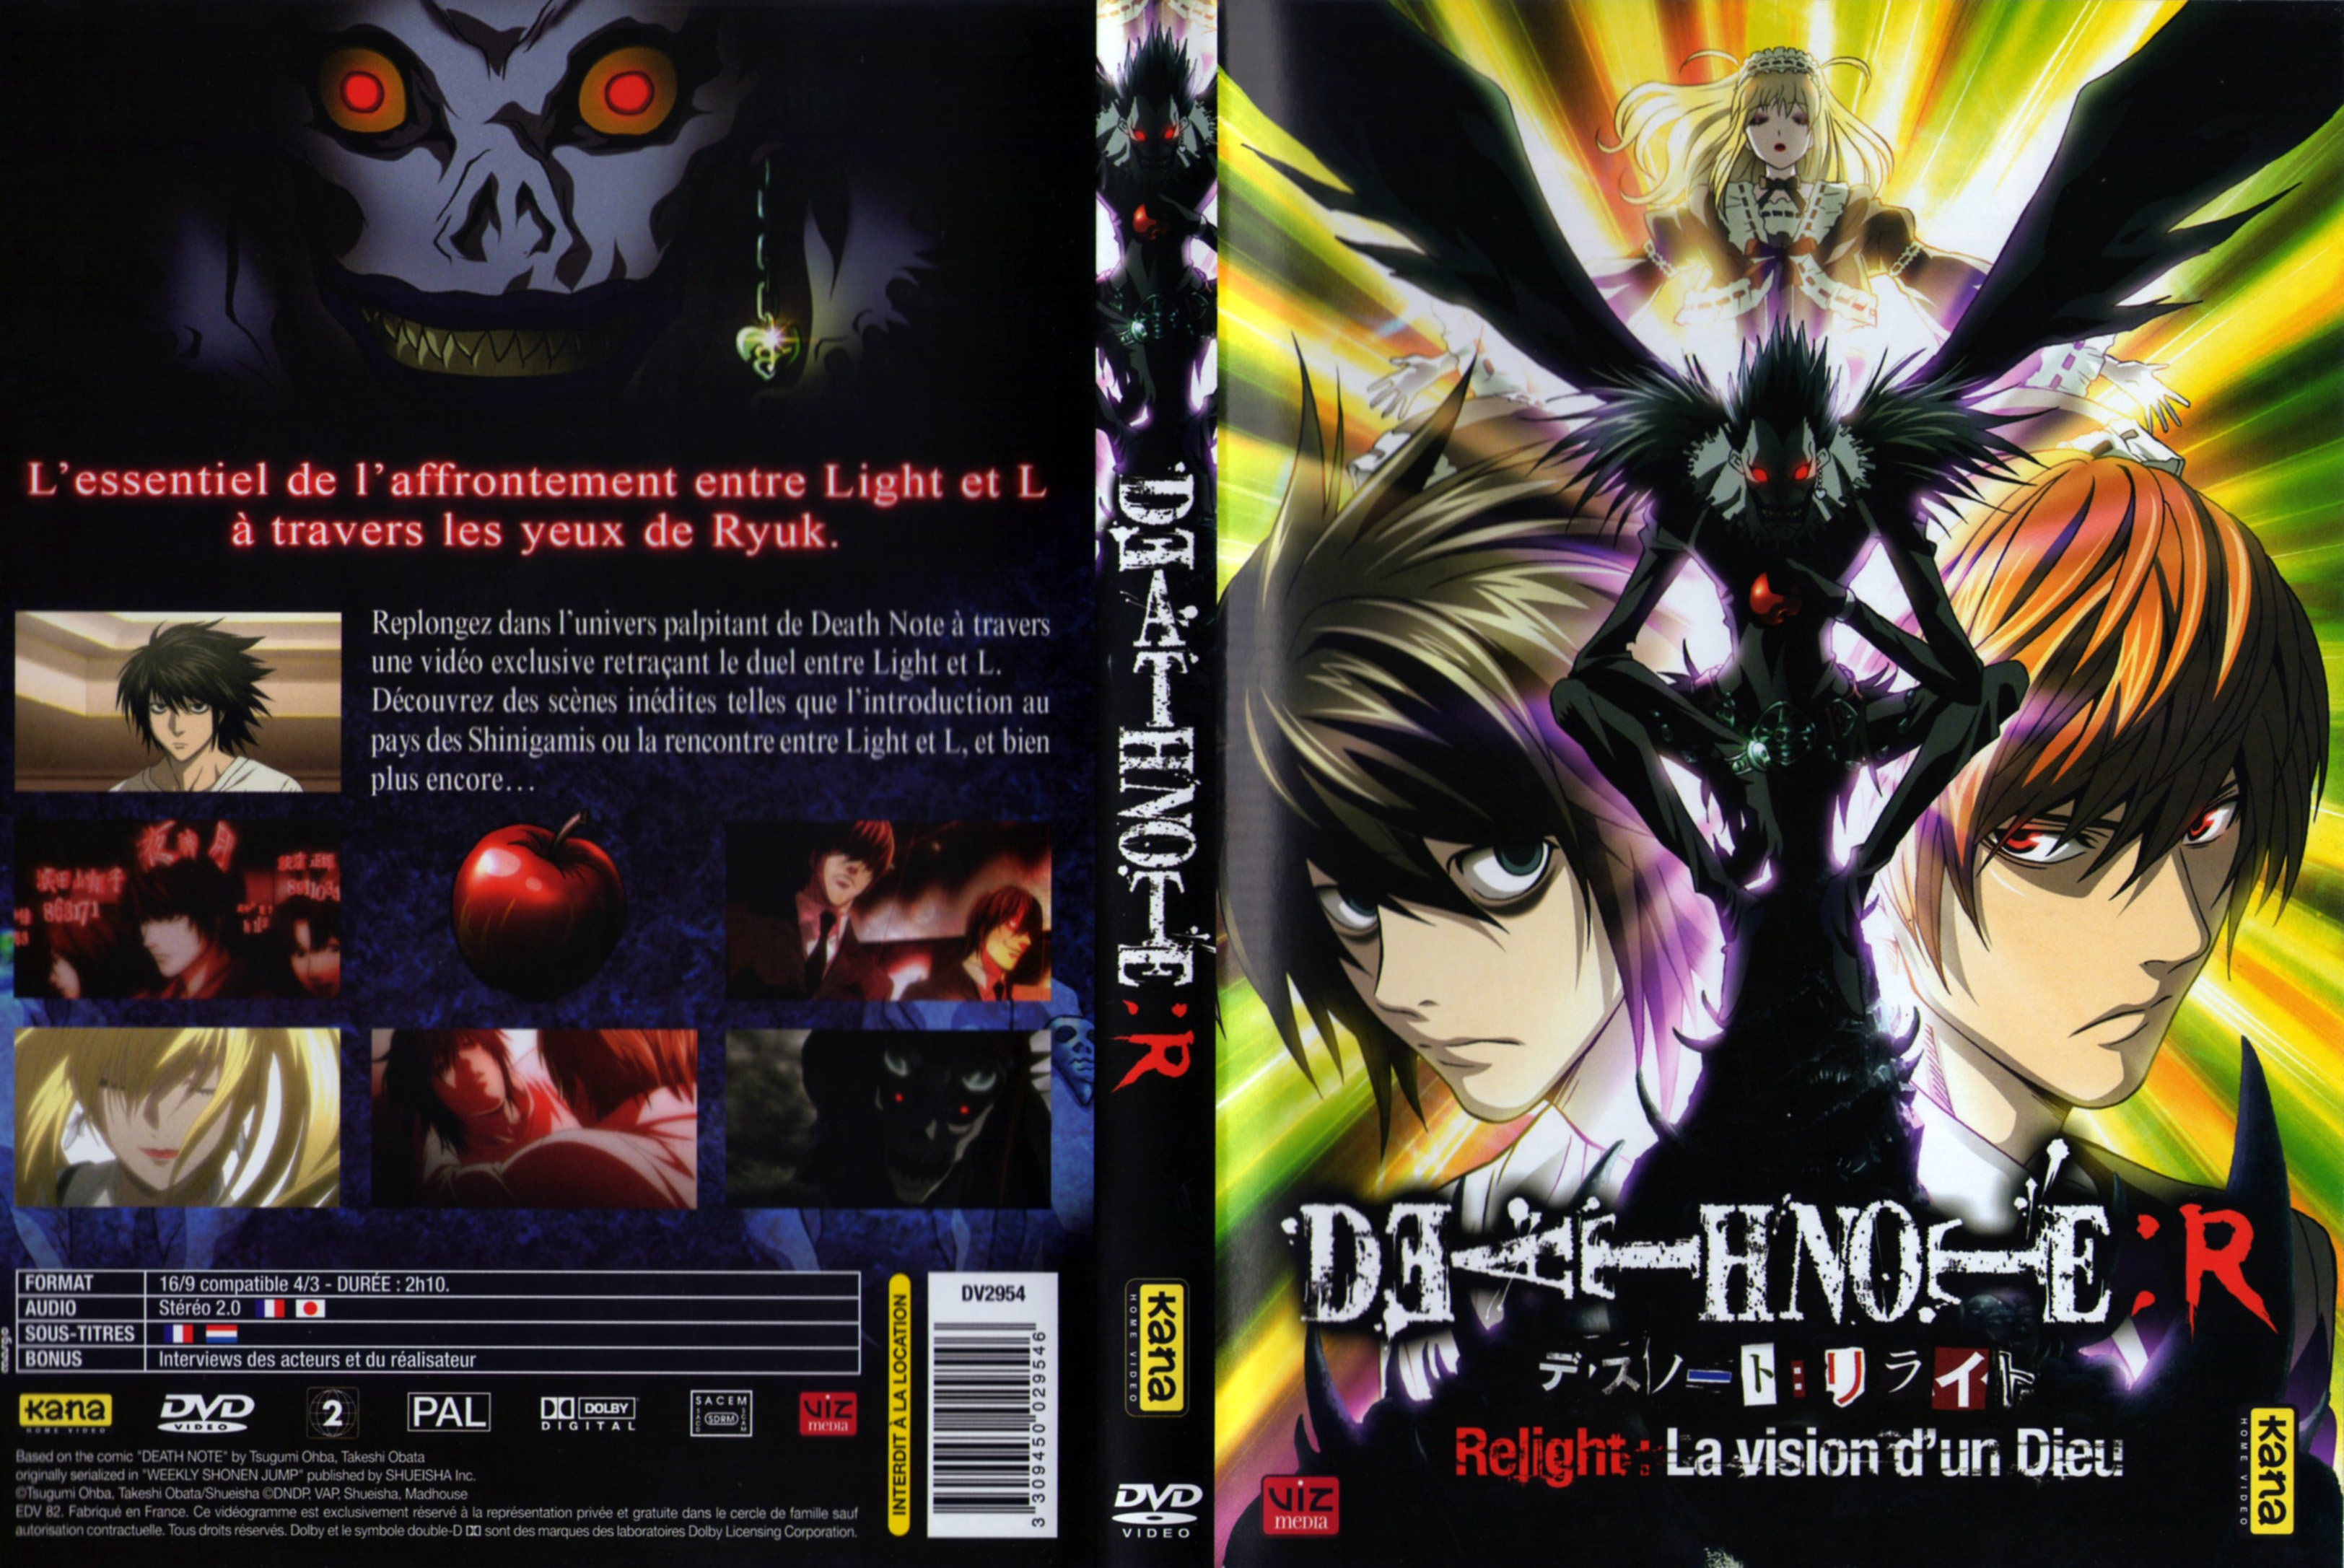 Jaquette DVD Death note Relight